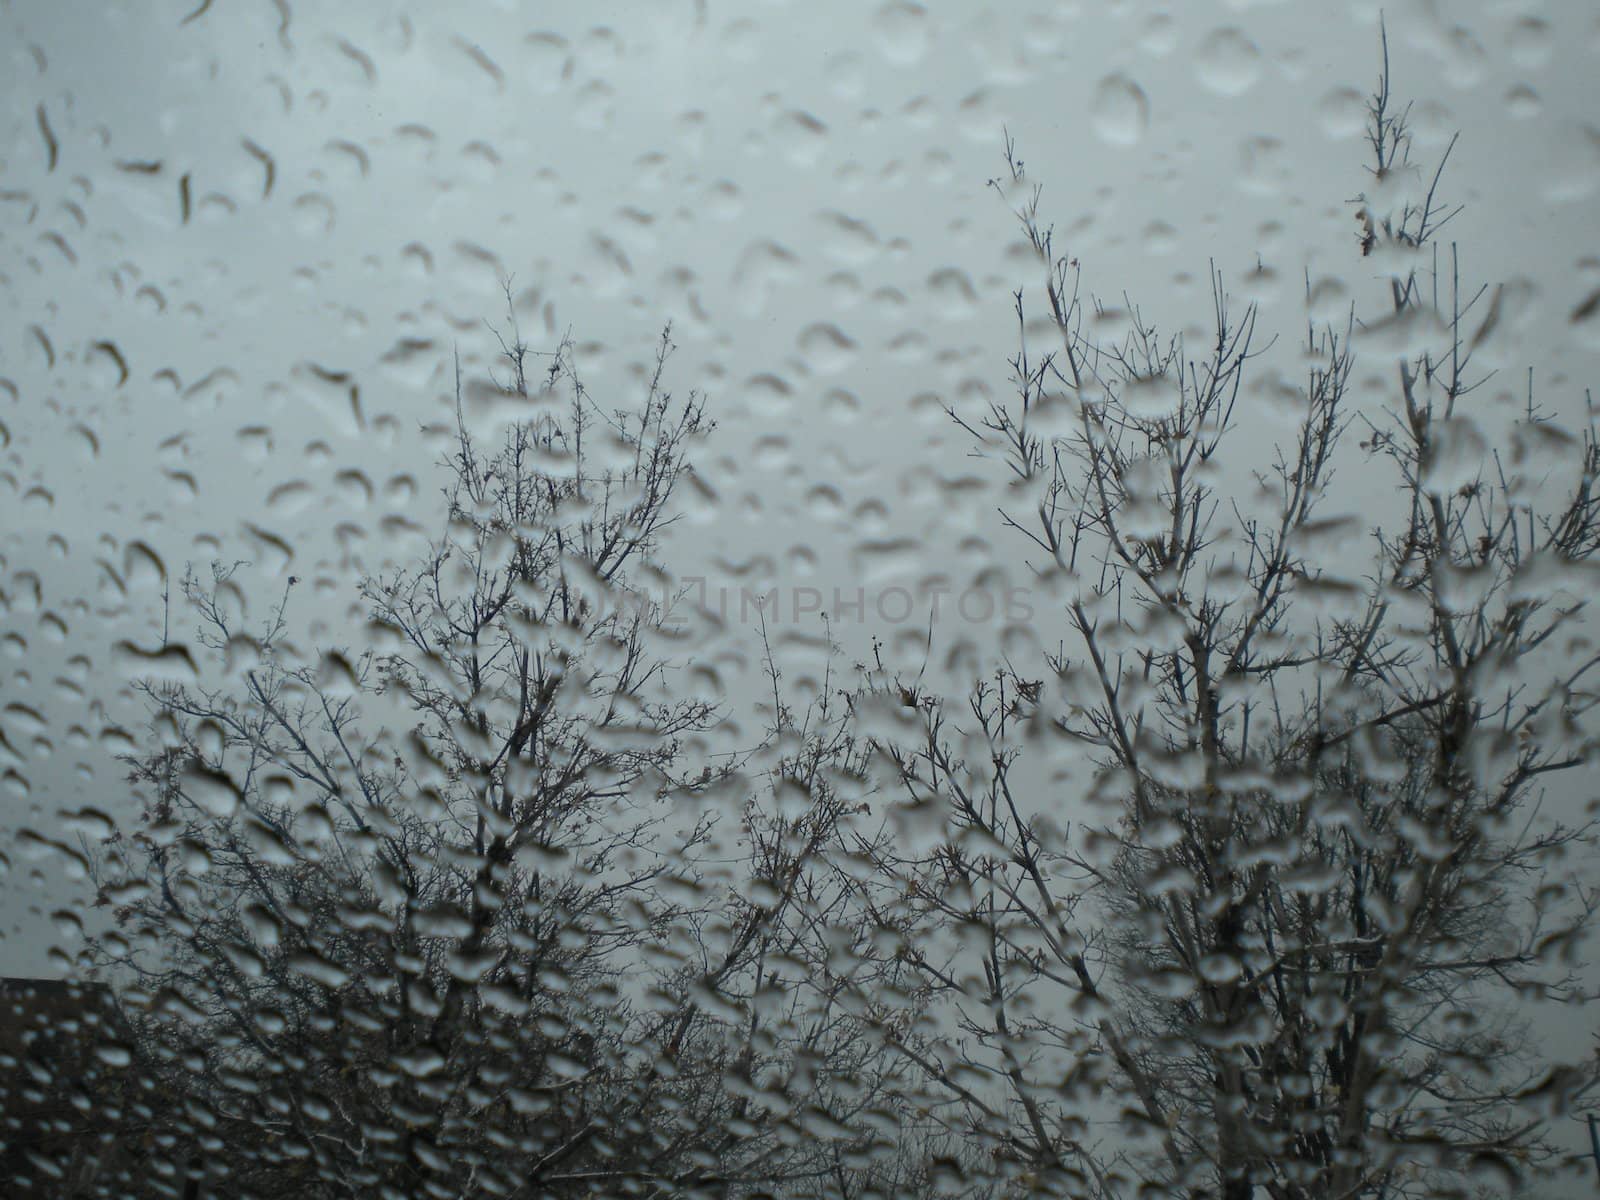 Rain falling on a window pane with trees on the other side.